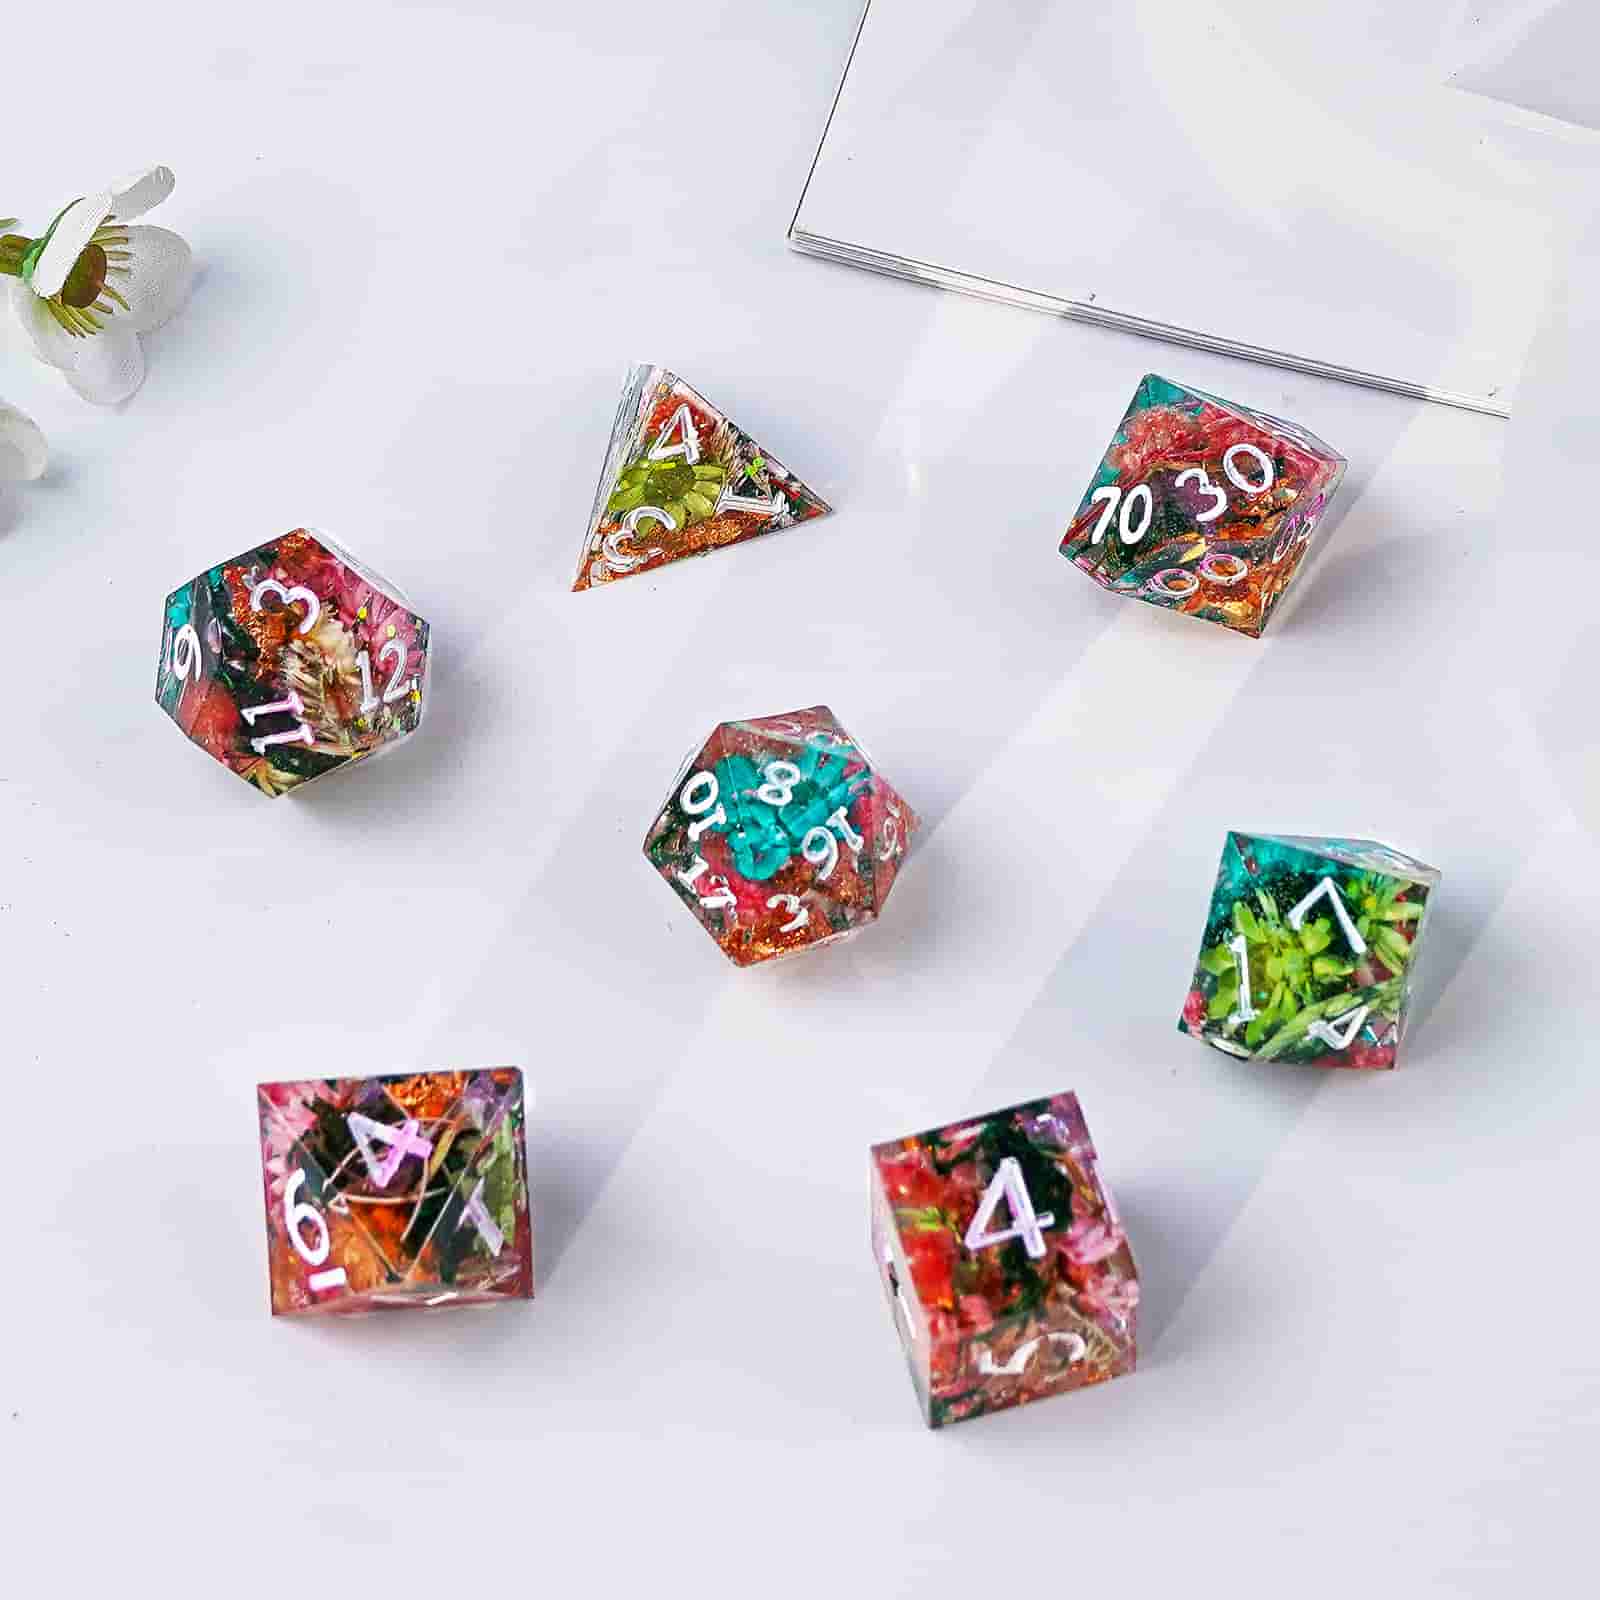 Let's Resin Resin Dice Molds Set with Letter Number